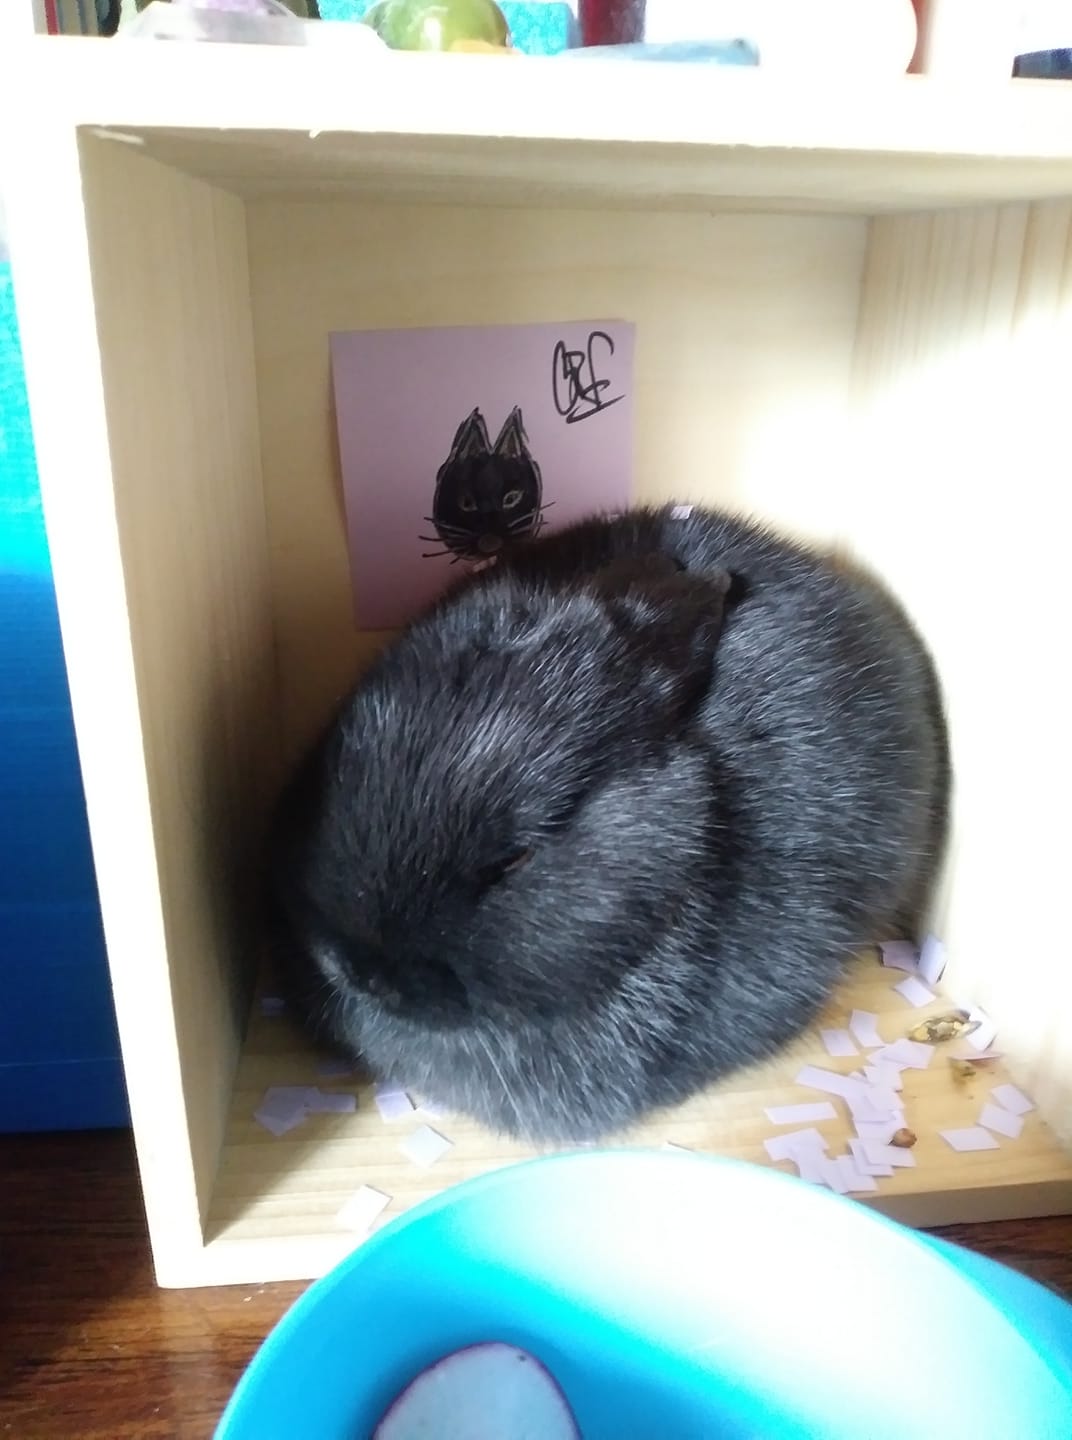 Black baby bunny in a small wooden box